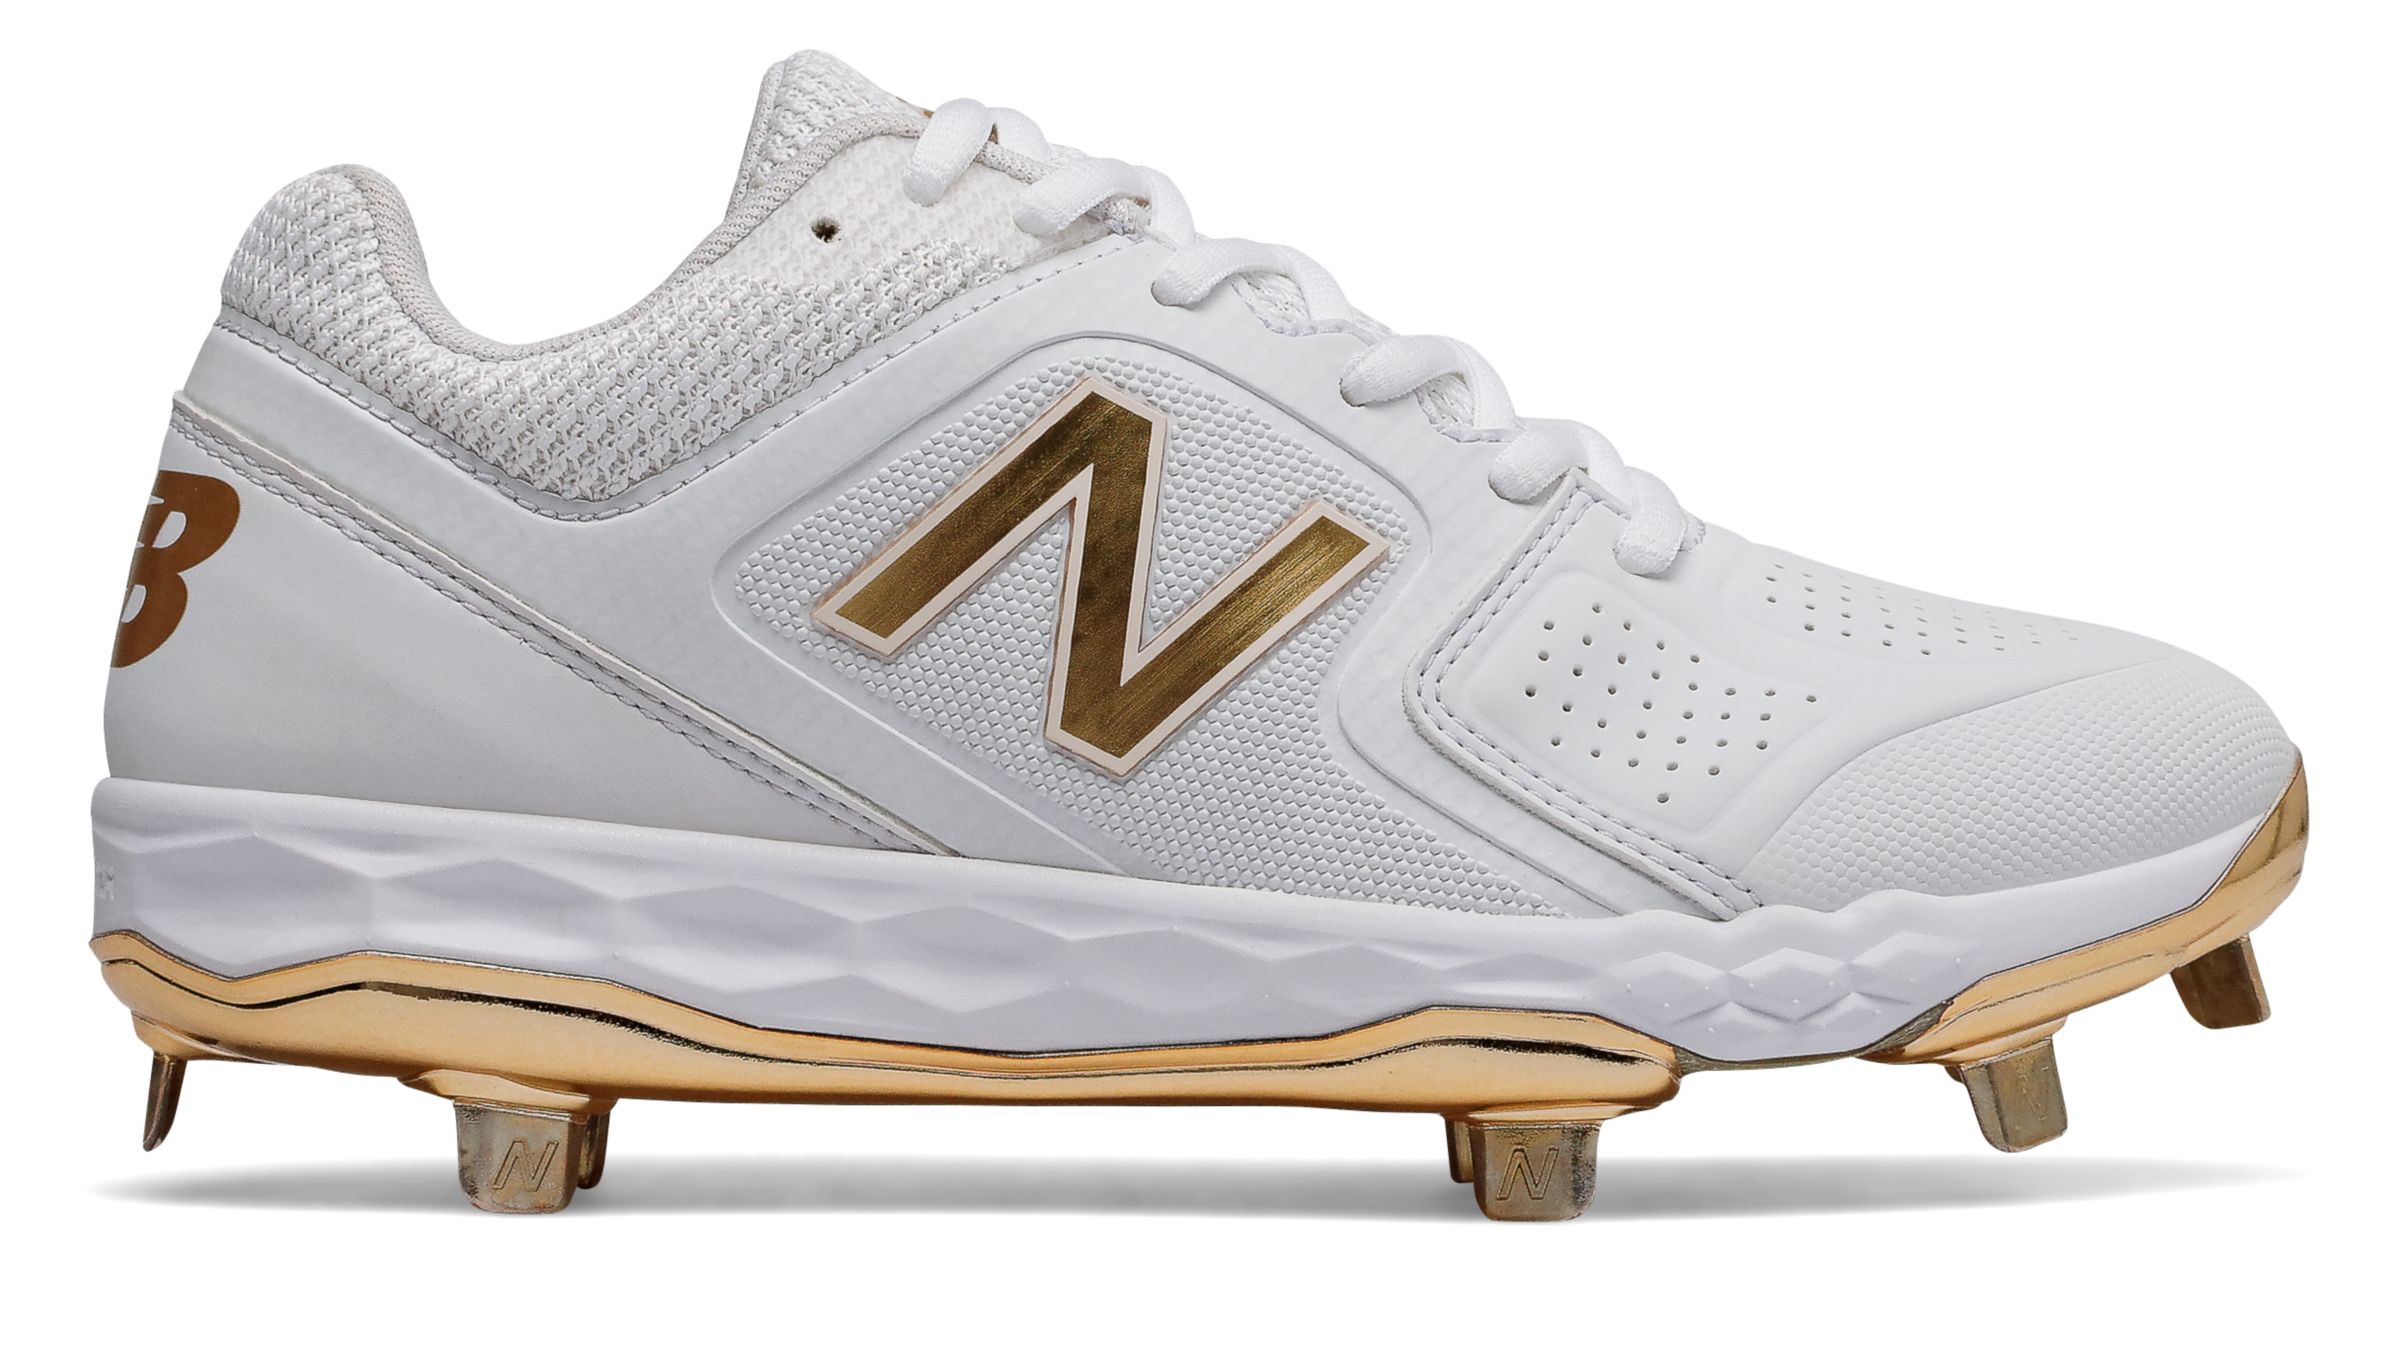 best cleats for softball pitchers